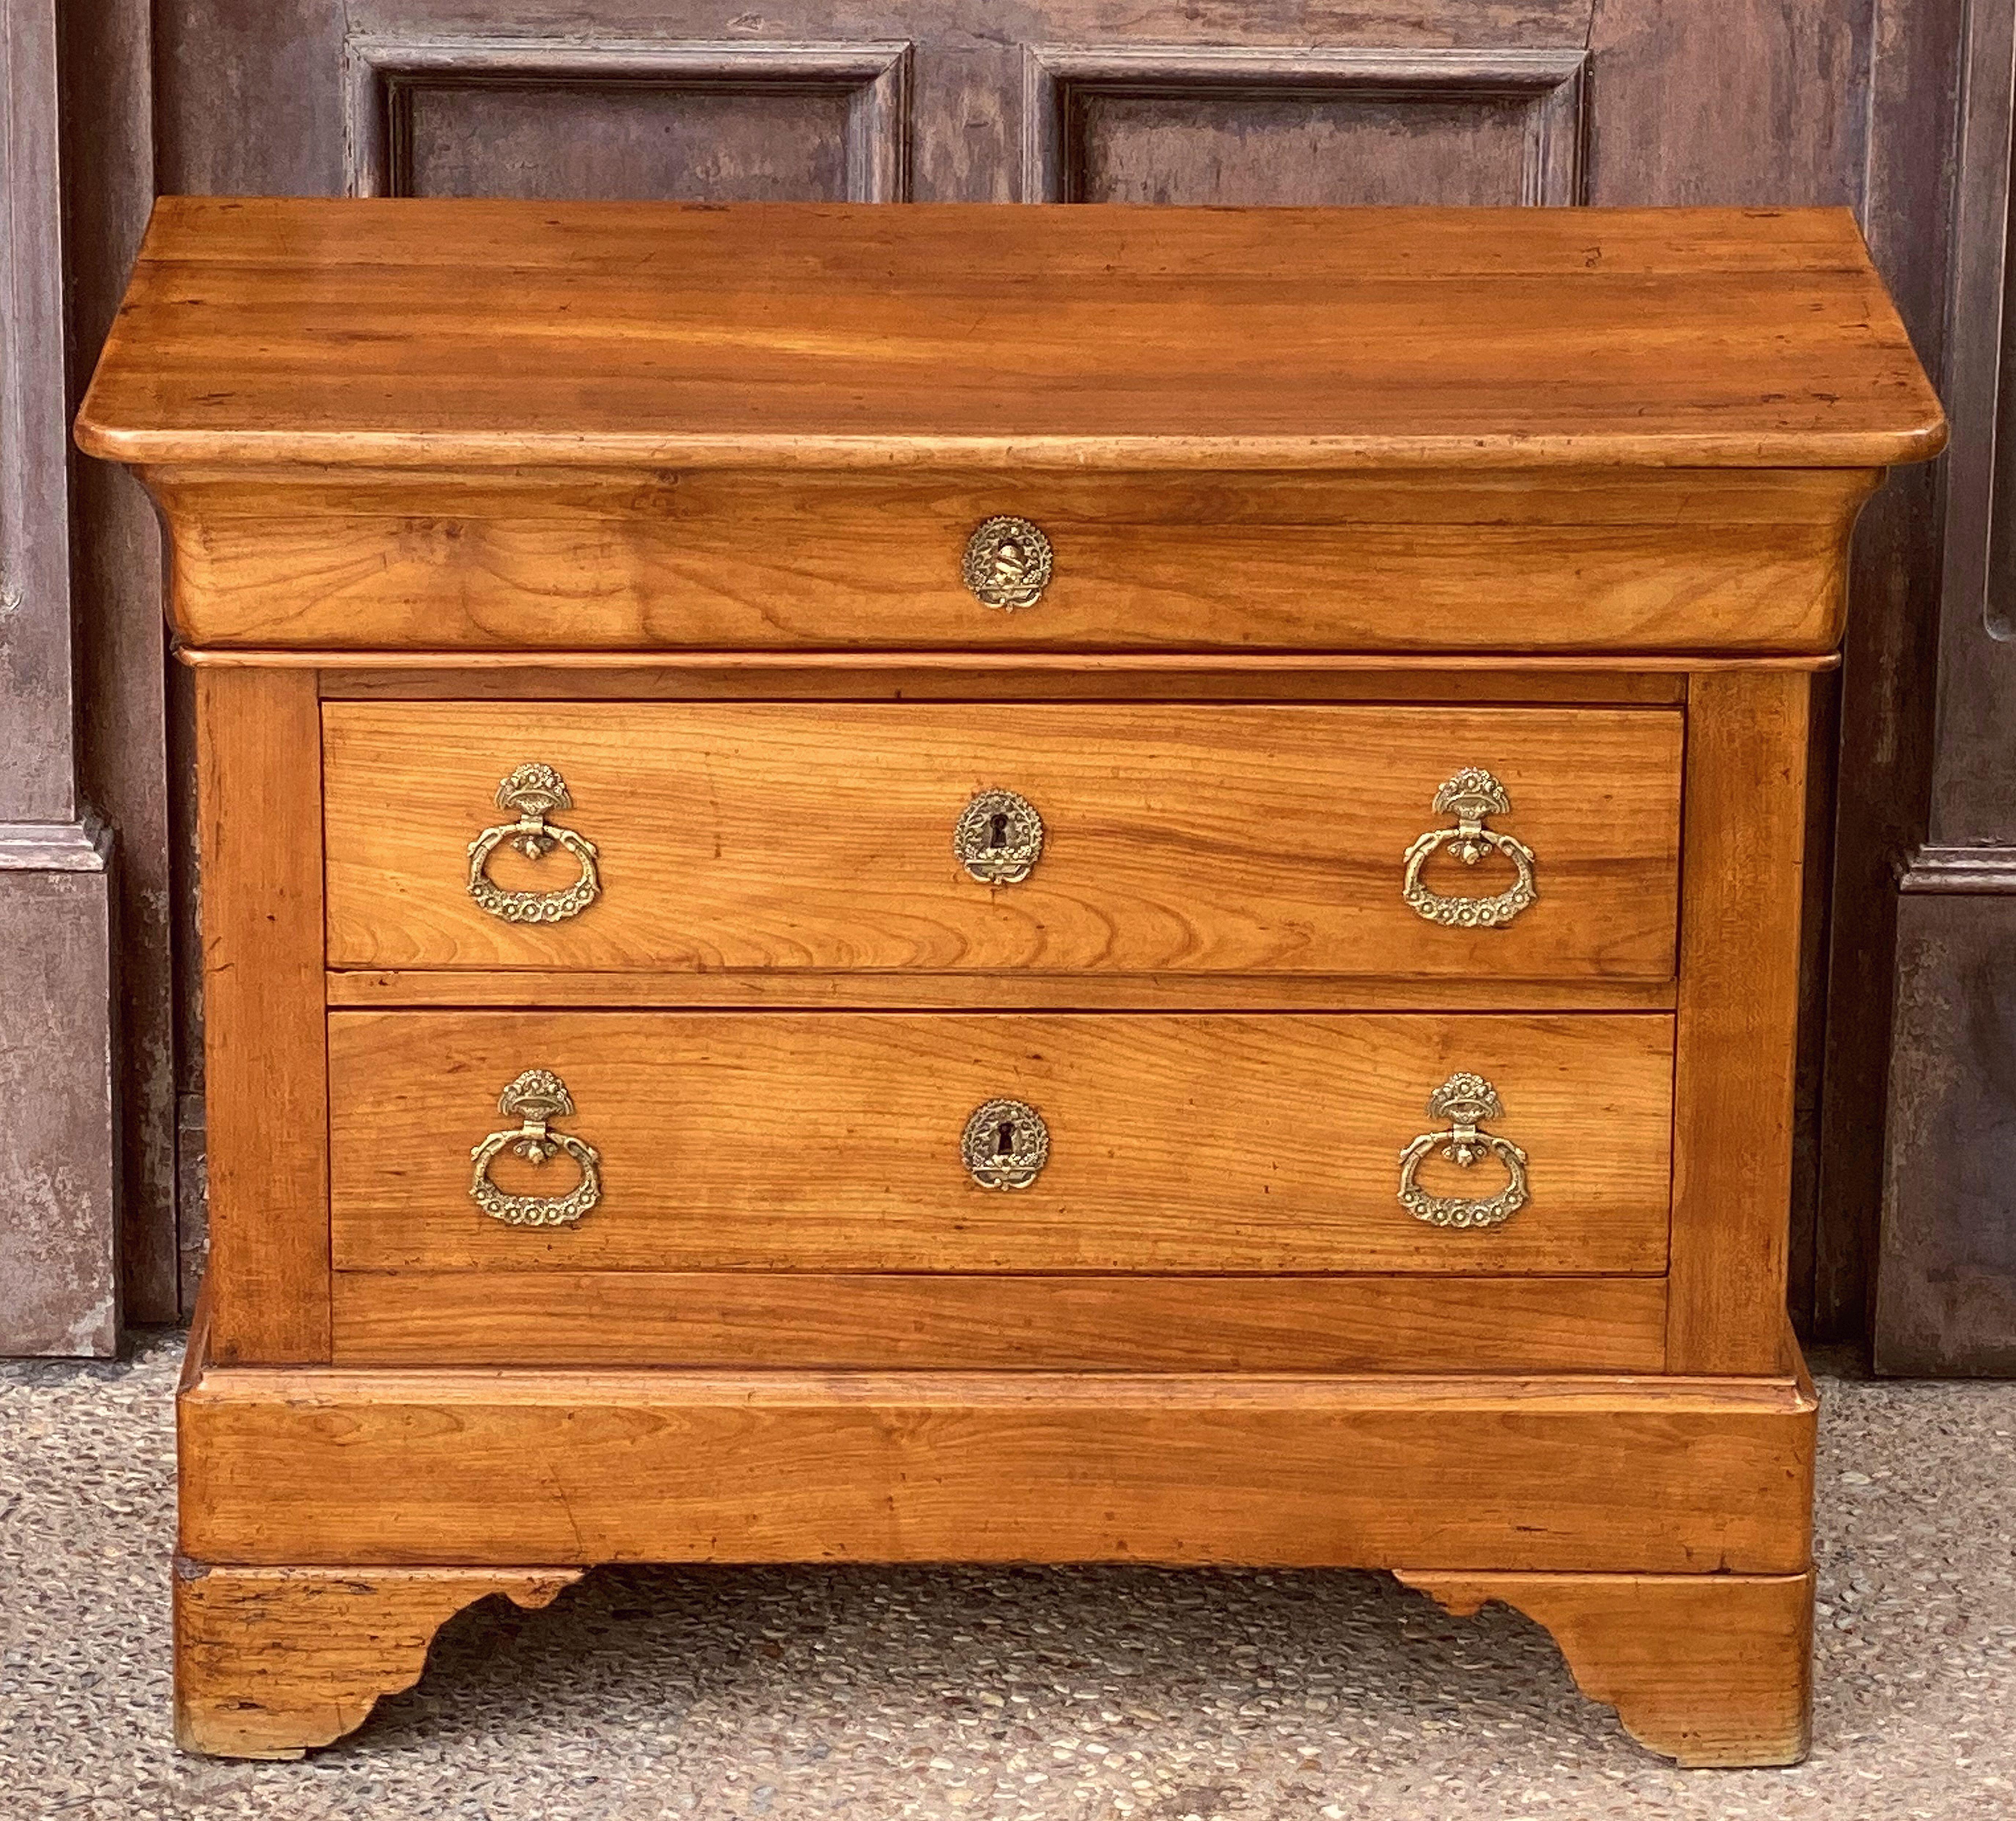 A fine French small chest of drawers or commode of patinated cherry, featuring a moulded top over a paneled base with three drawers, with original brass handles and escutcheons, with key, and resting on bracket feet.
  